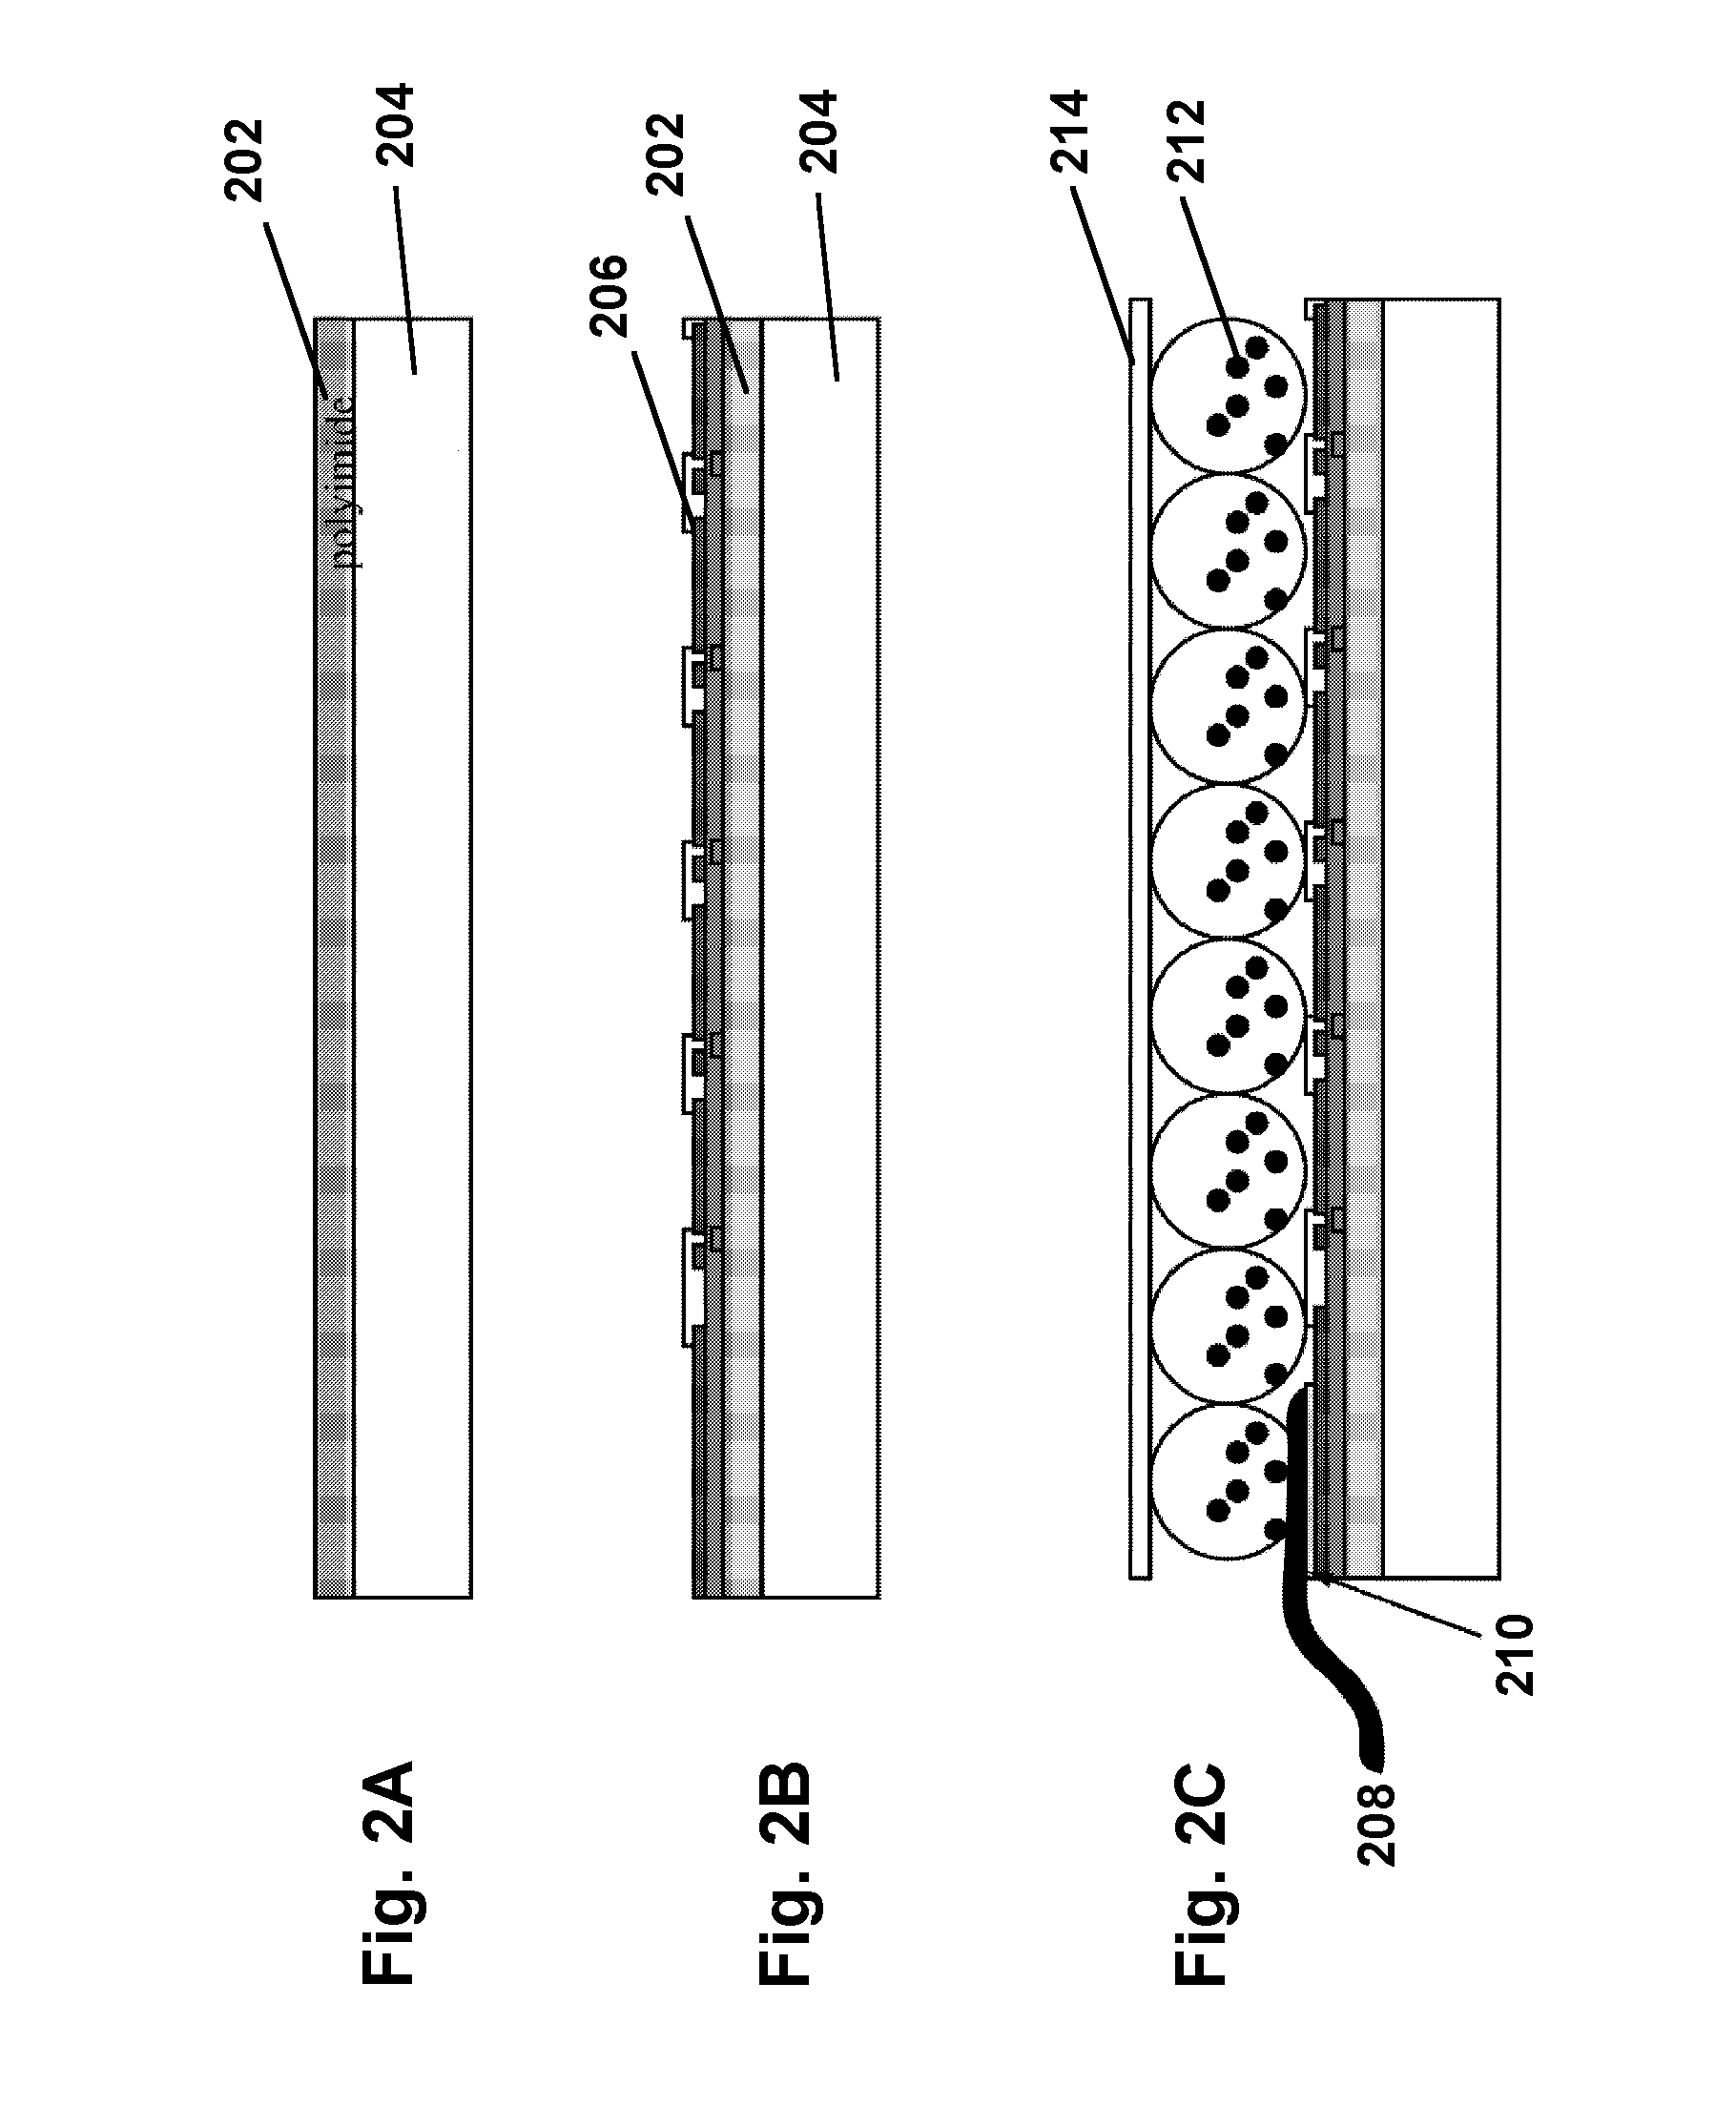 Processes for forming backplanes for electro-optic displays